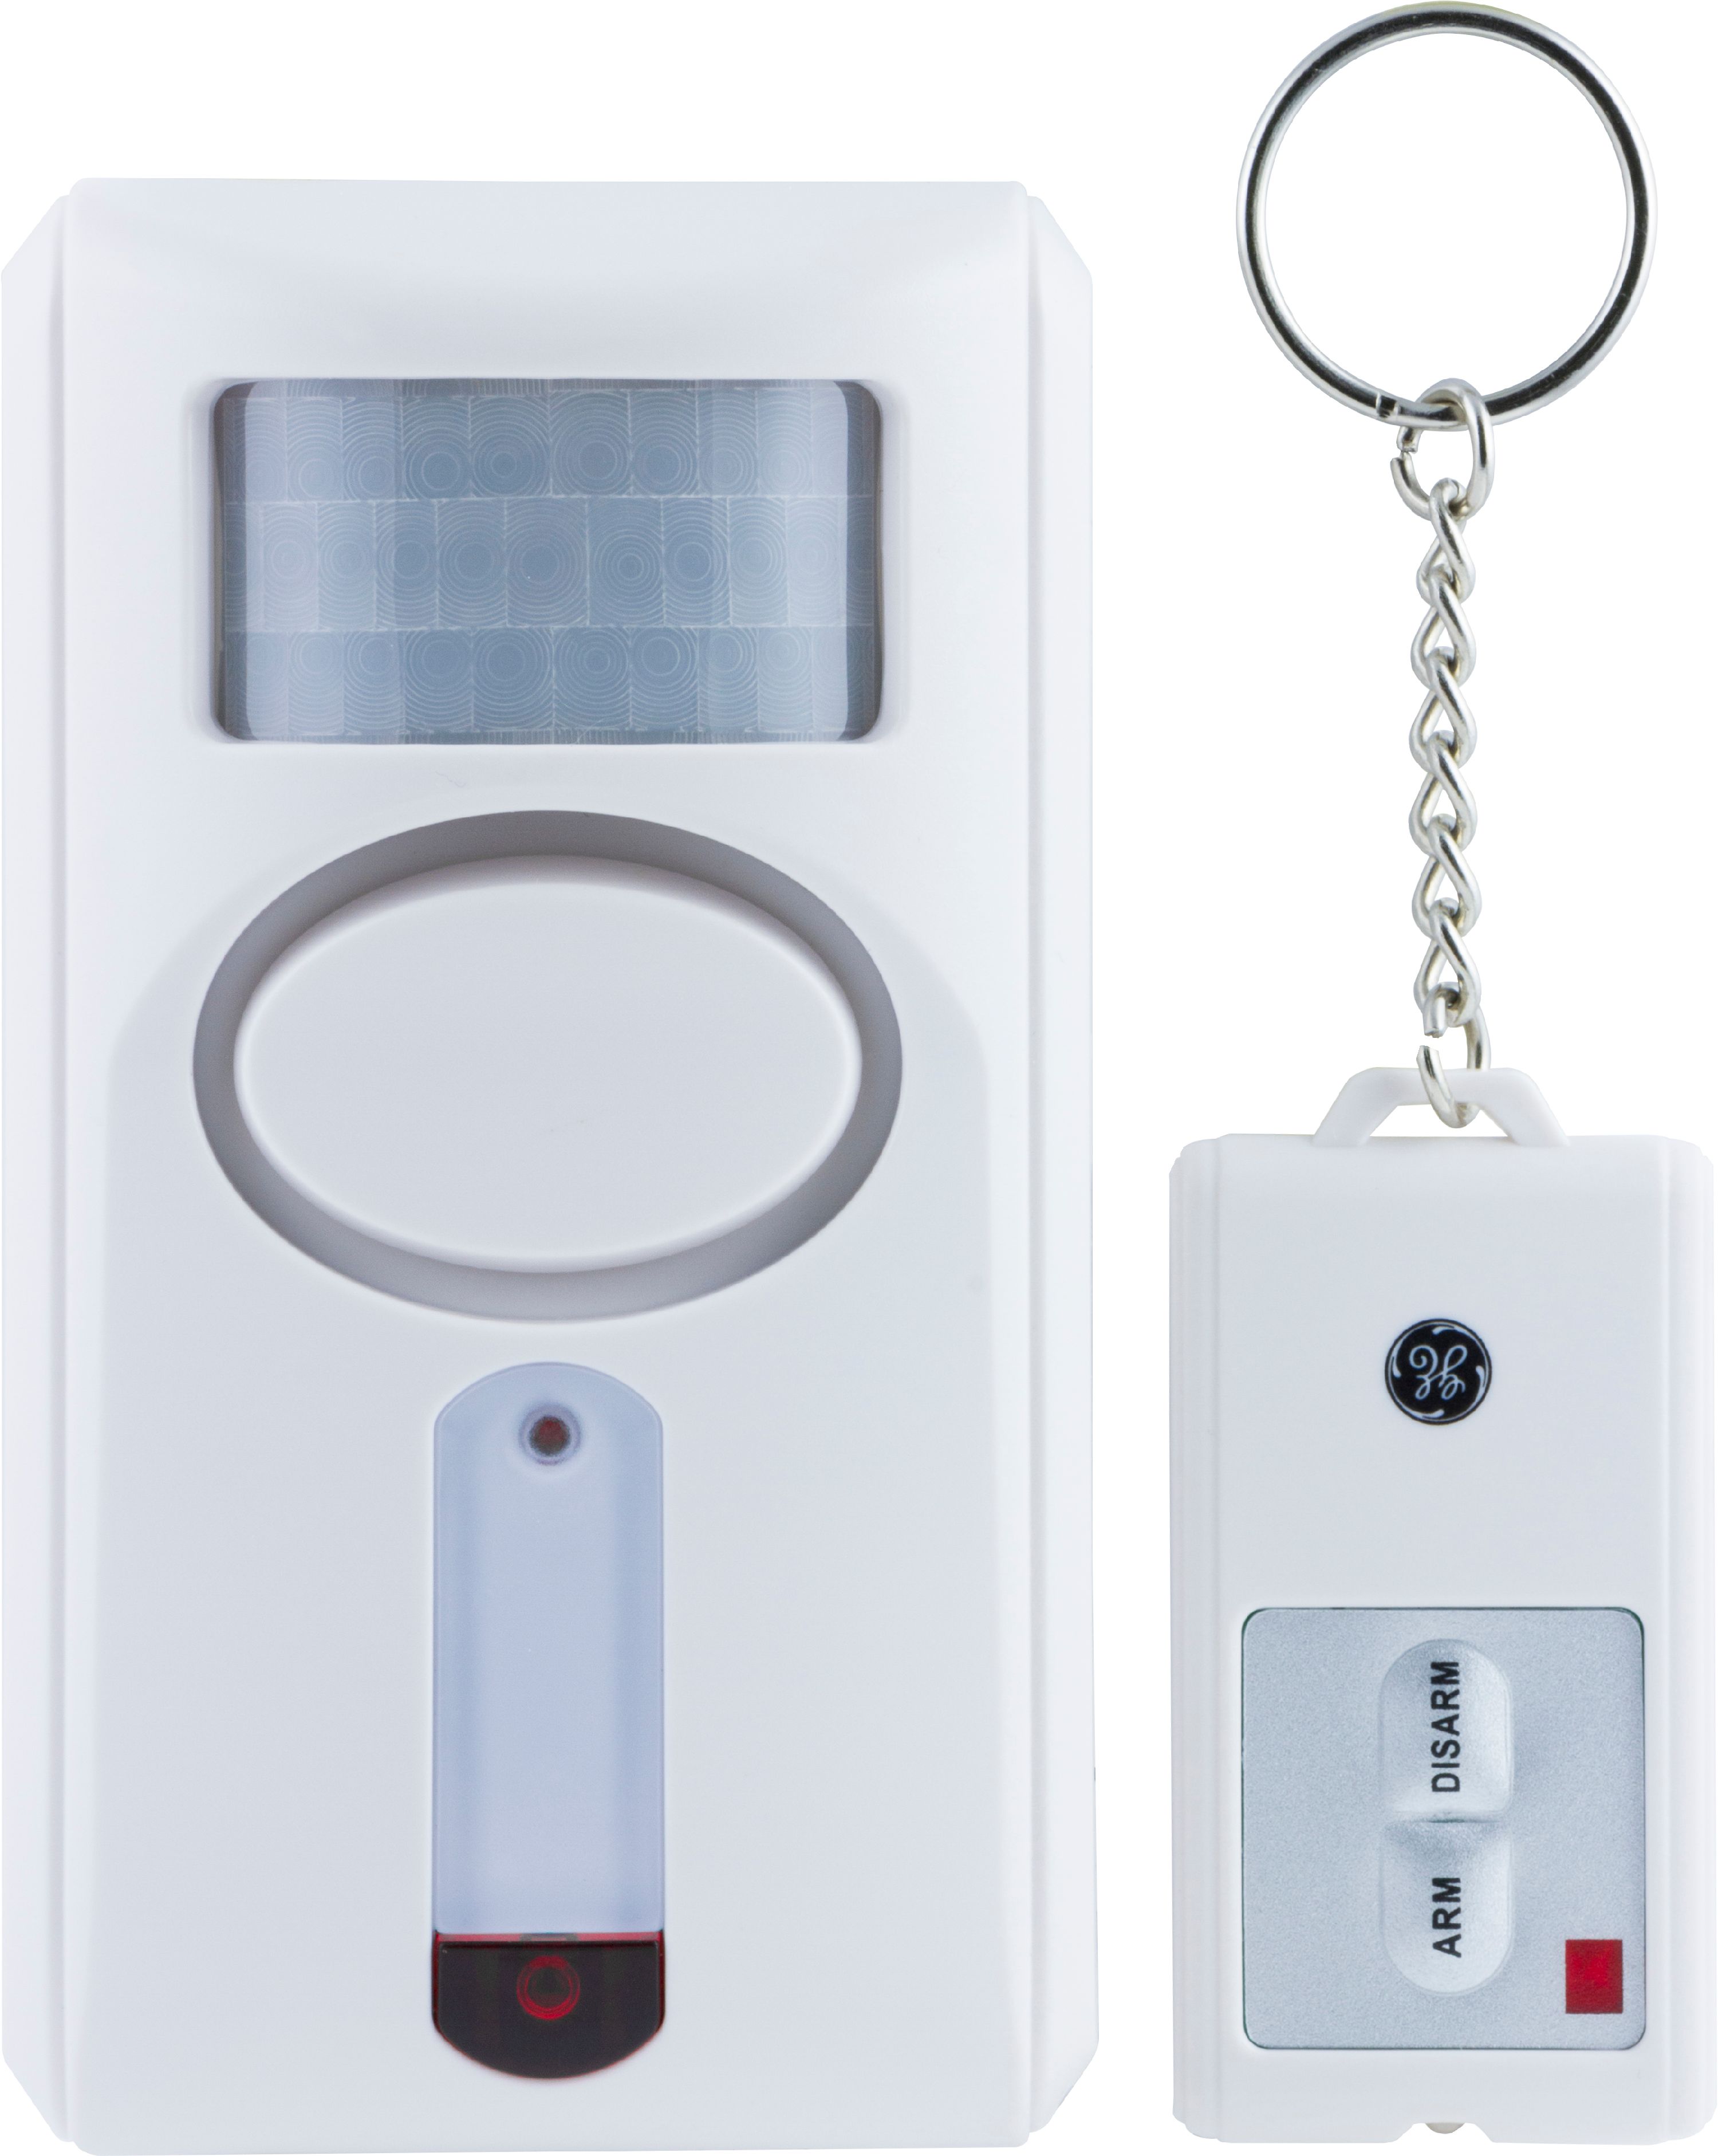 GE Wireless Motion Sensor Alarm With Key Chain Remote 51207 - image 1 of 5